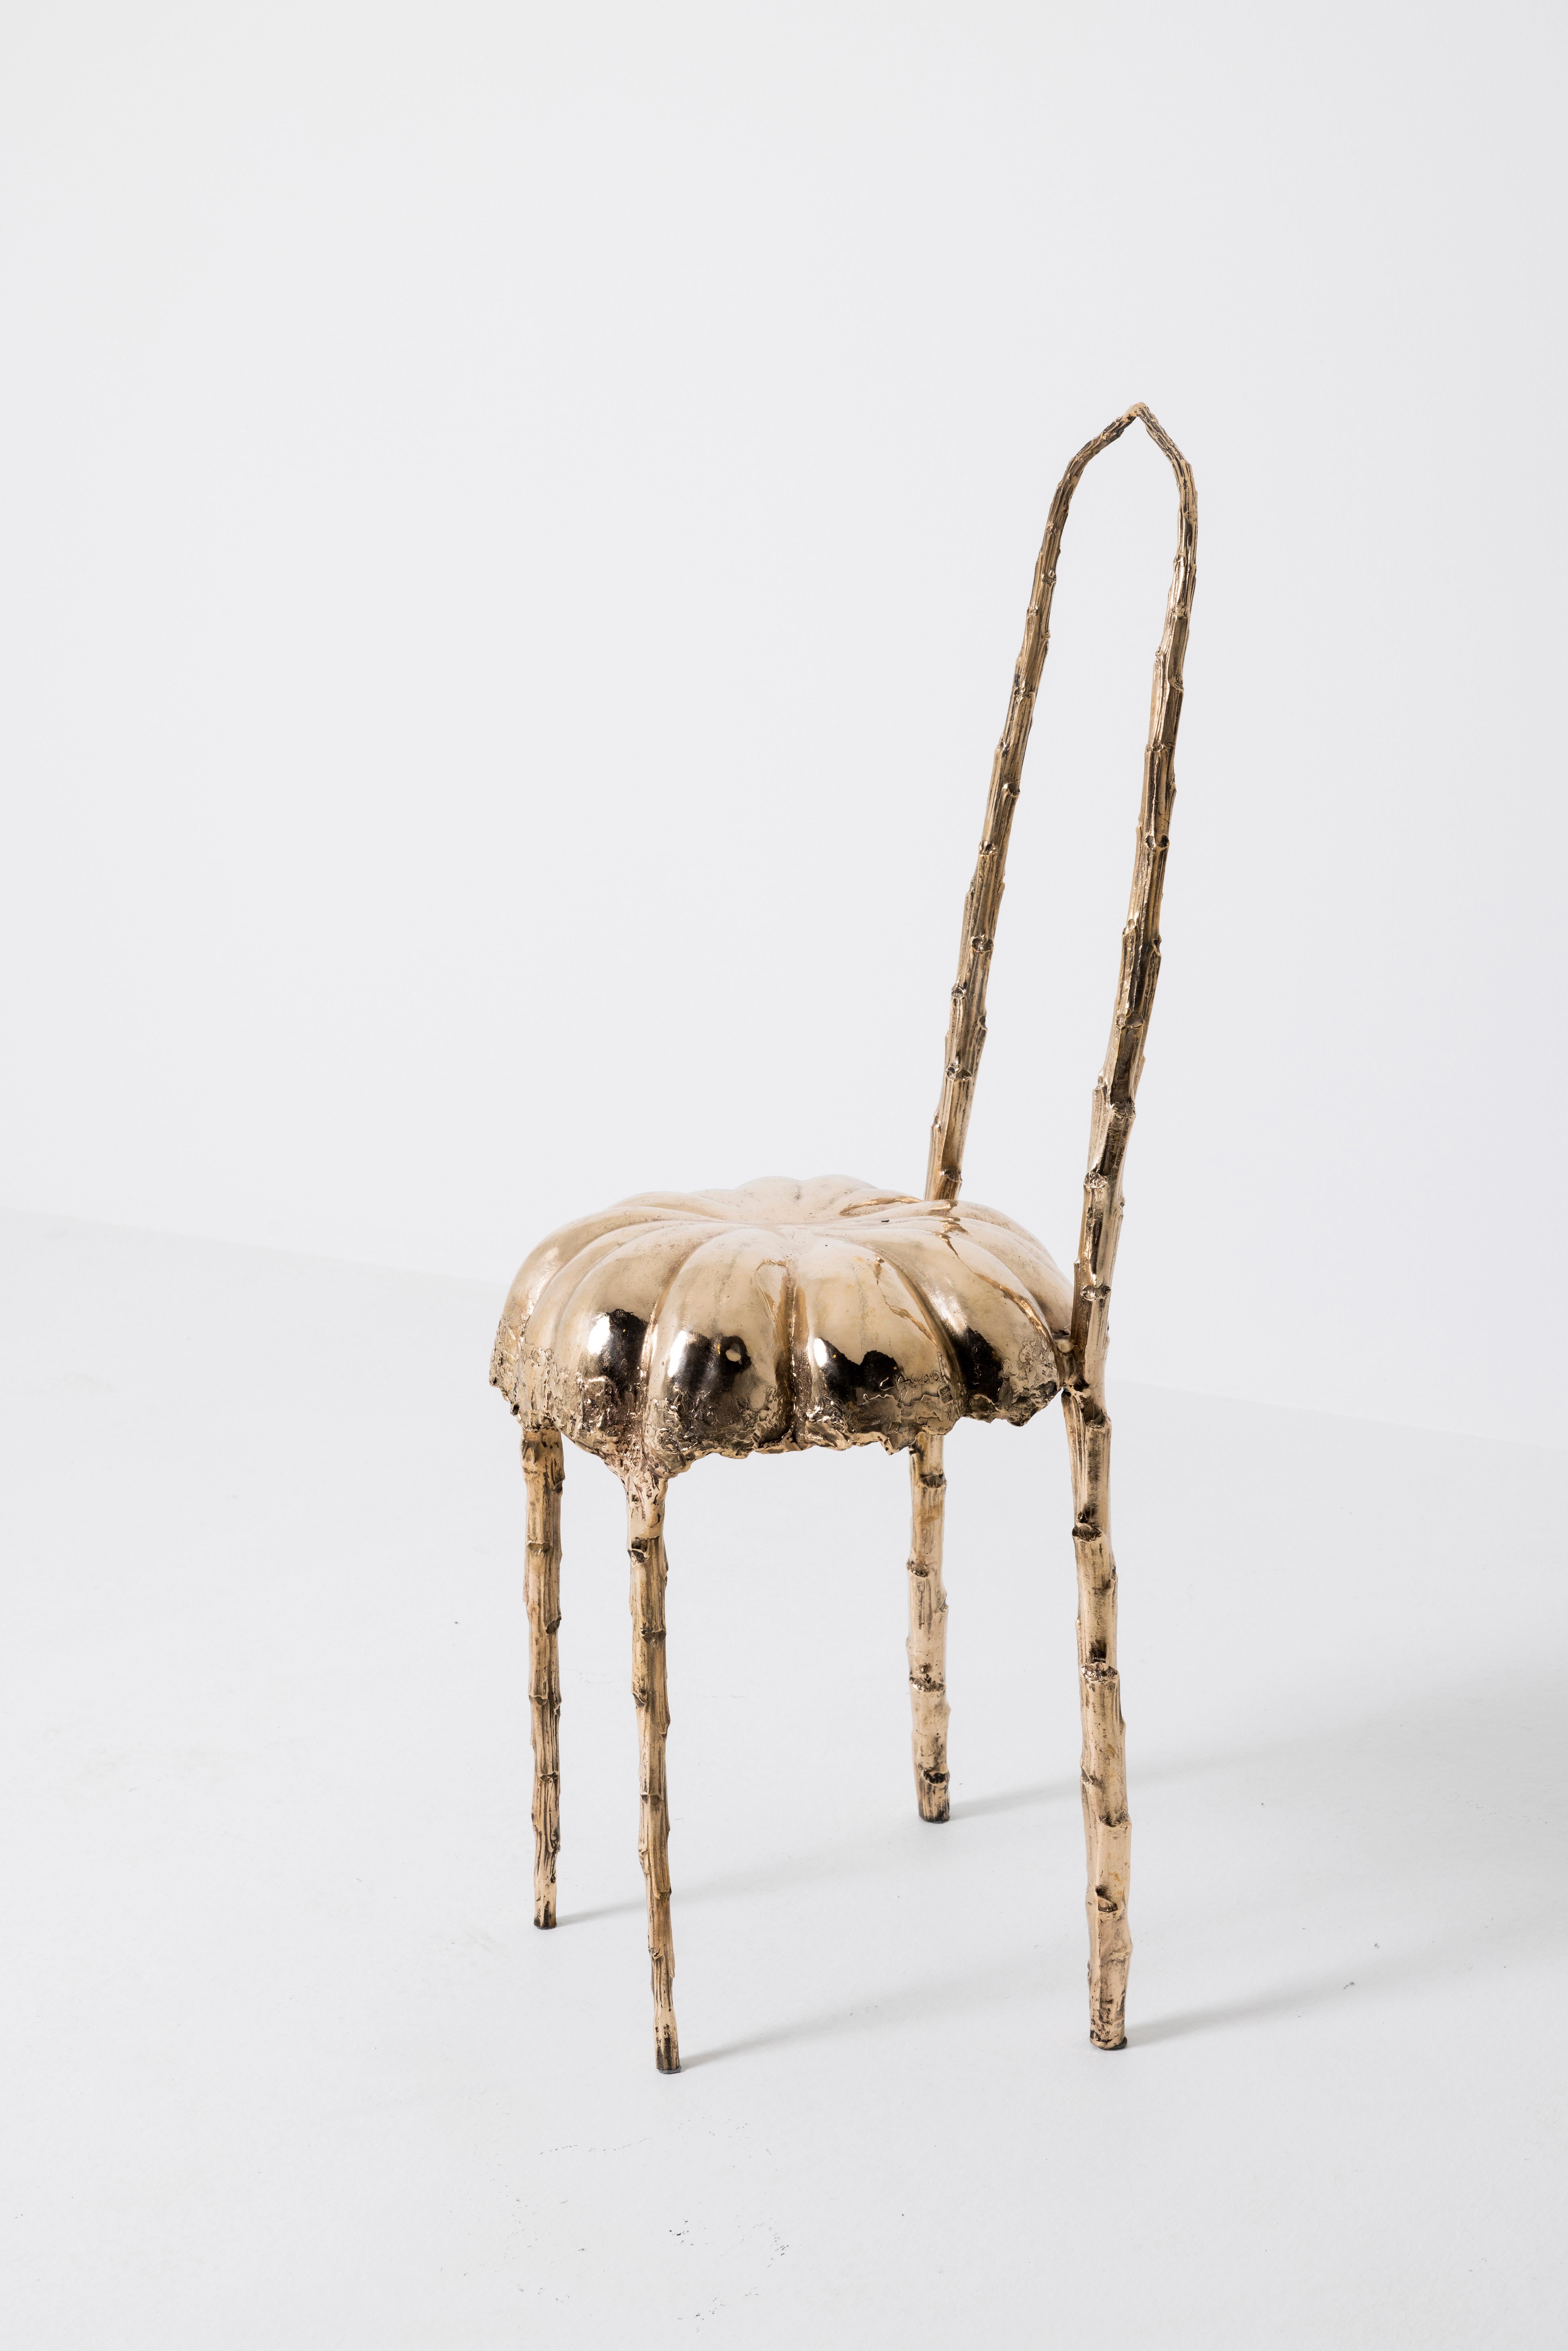 Organic Modern Contemporary Bronze Jellyfish Chair by Clotilde Ancarani For Sale